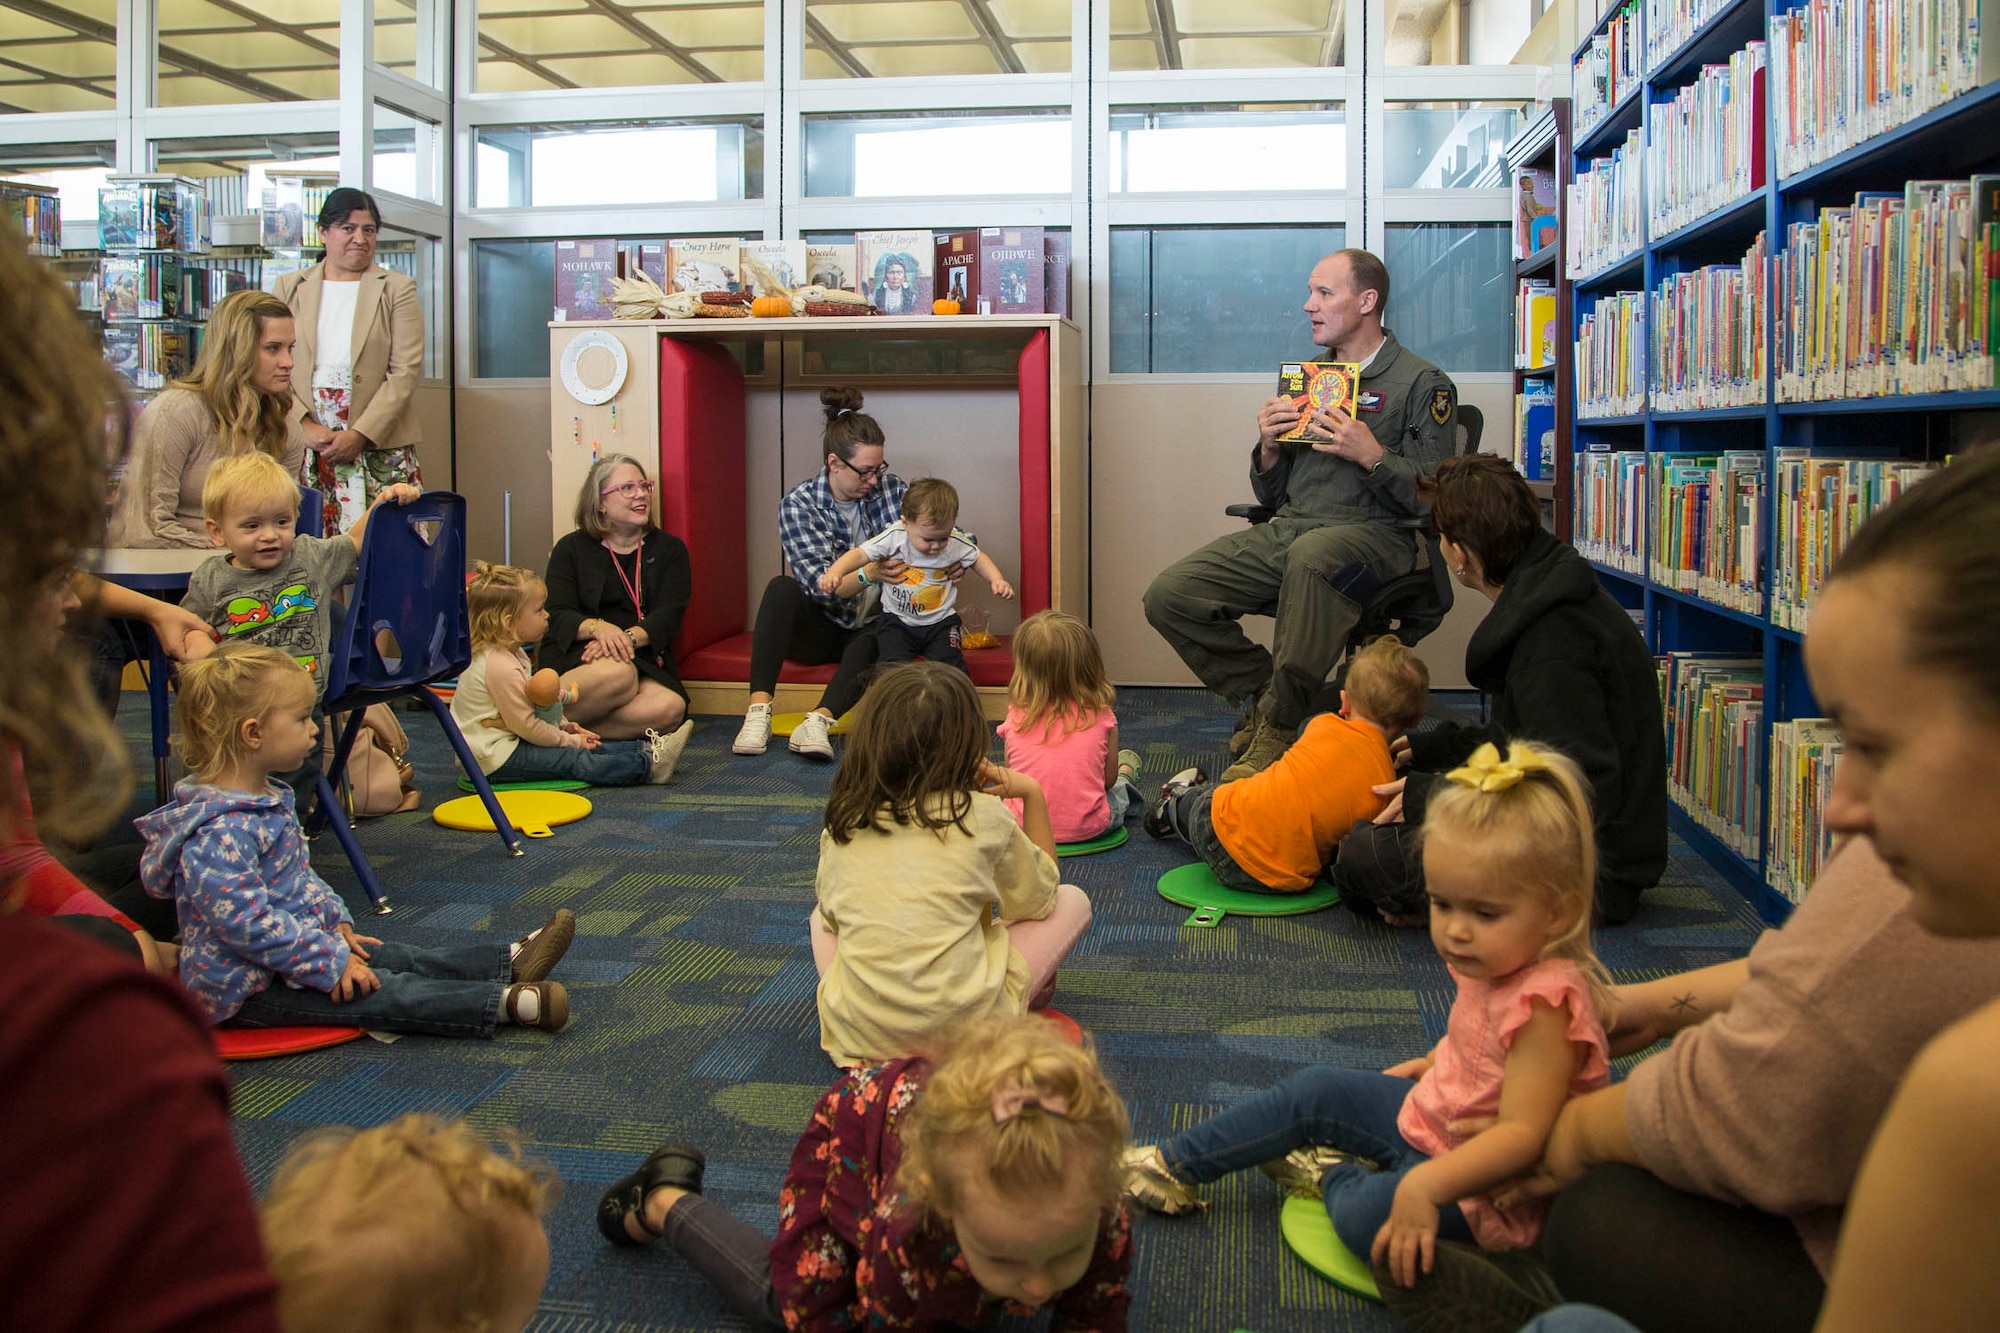 The 412th Test Wing and NASA Armstrong Flight Research Center kicked off Native American Heritage Month at the base library Nov. 1. (U.S. Air Force photo by Christian Turner)